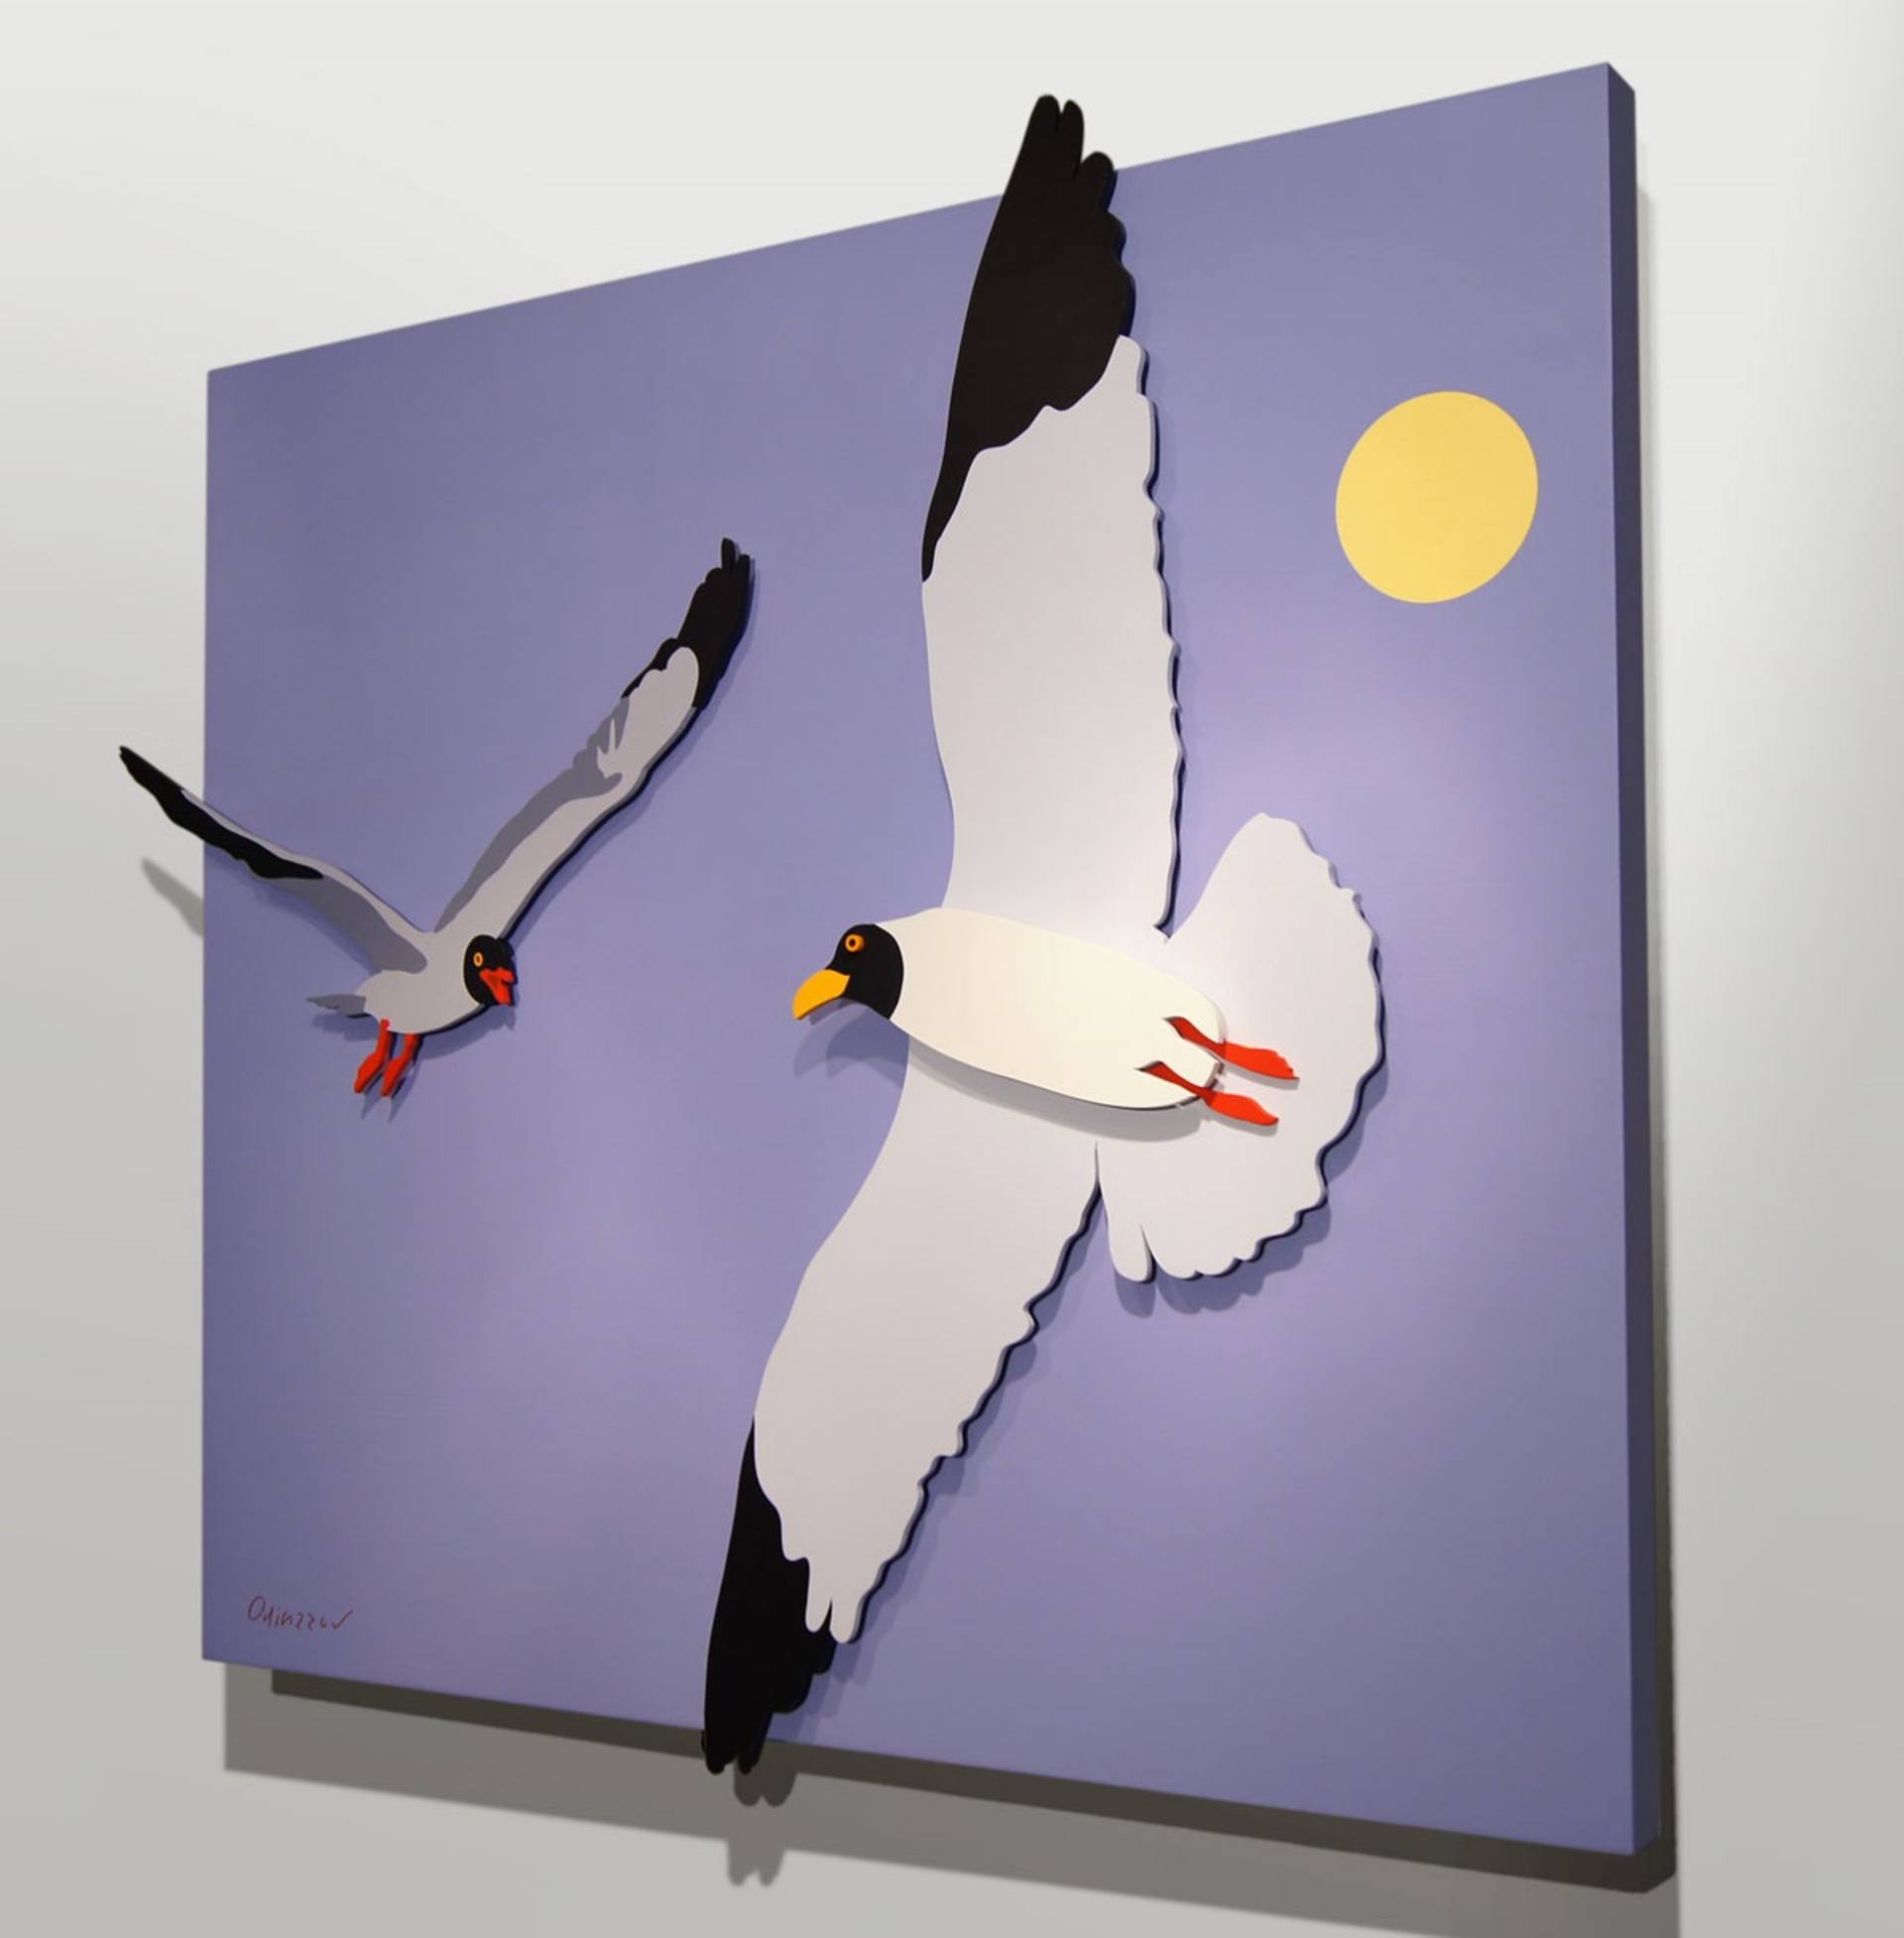 Two Seagulls 3d Wall Art Sculpture By Andrey Odinzzov Saatchi Art